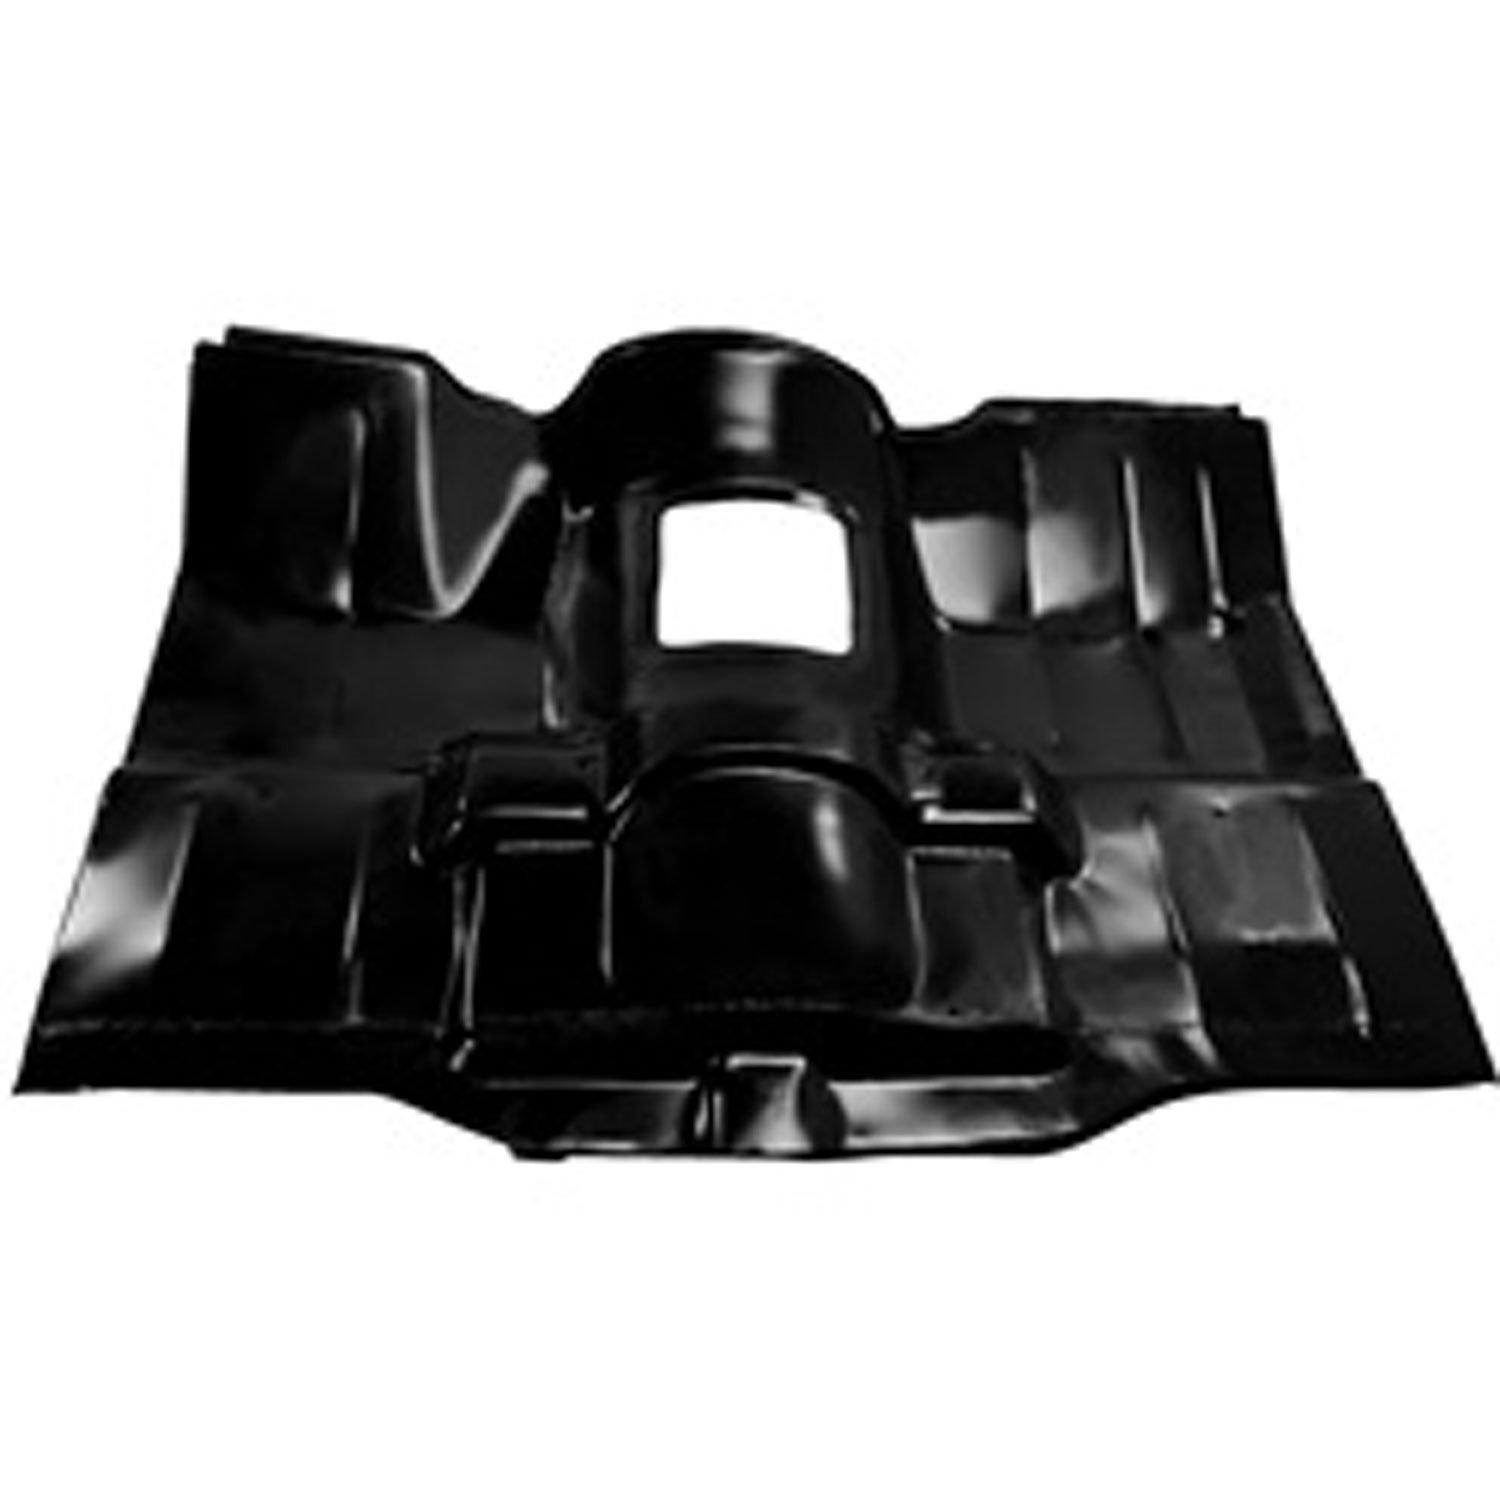 Replacement front floor panel from Omix-ADA, Fits 76-83 Jeep CJ5.is an 18 gauge steel panel.